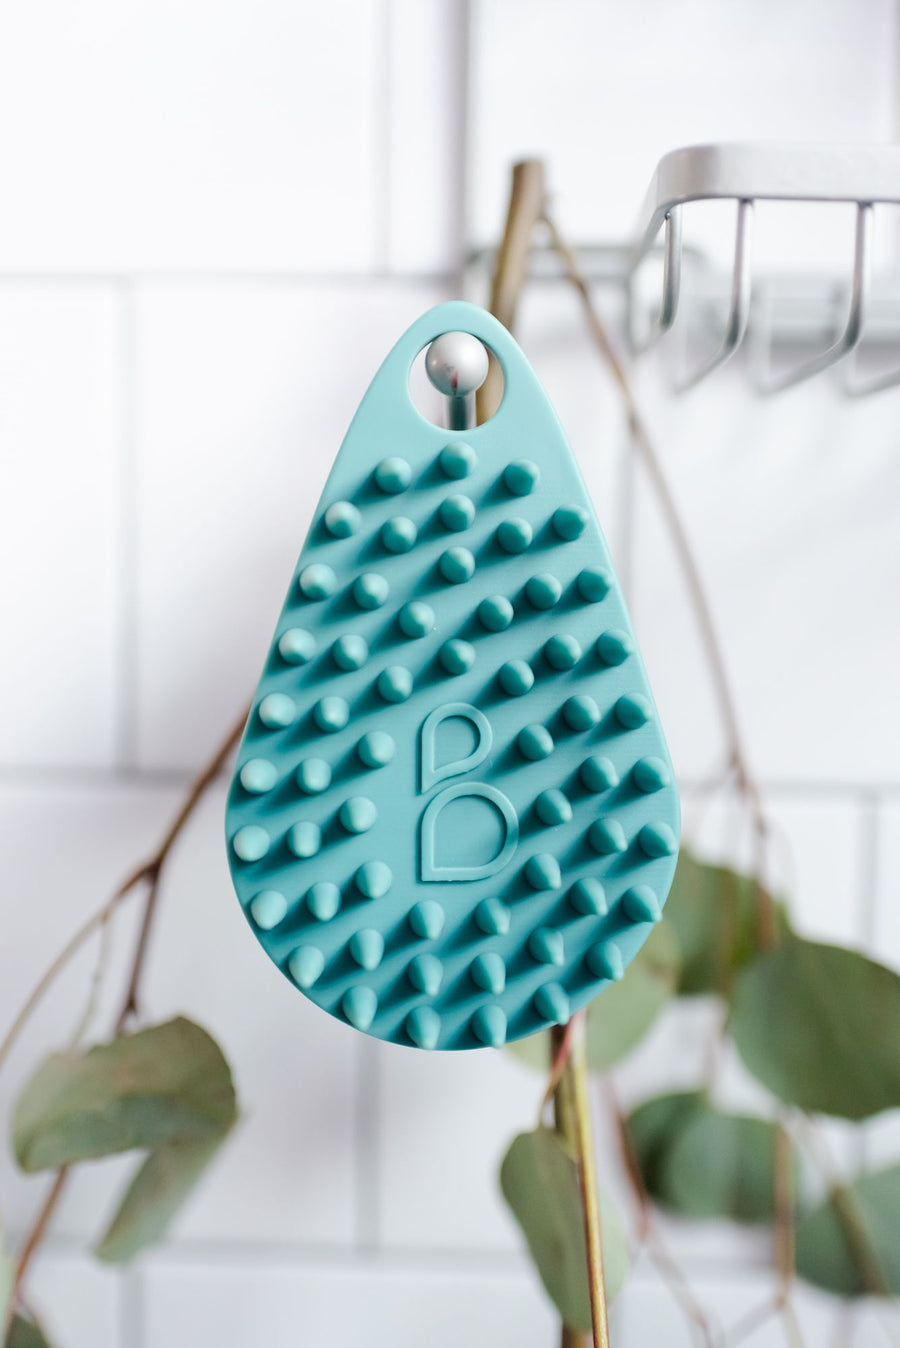 Scrub-dub™ body scrubber hanging from shower hook with eucalyptus in the background.